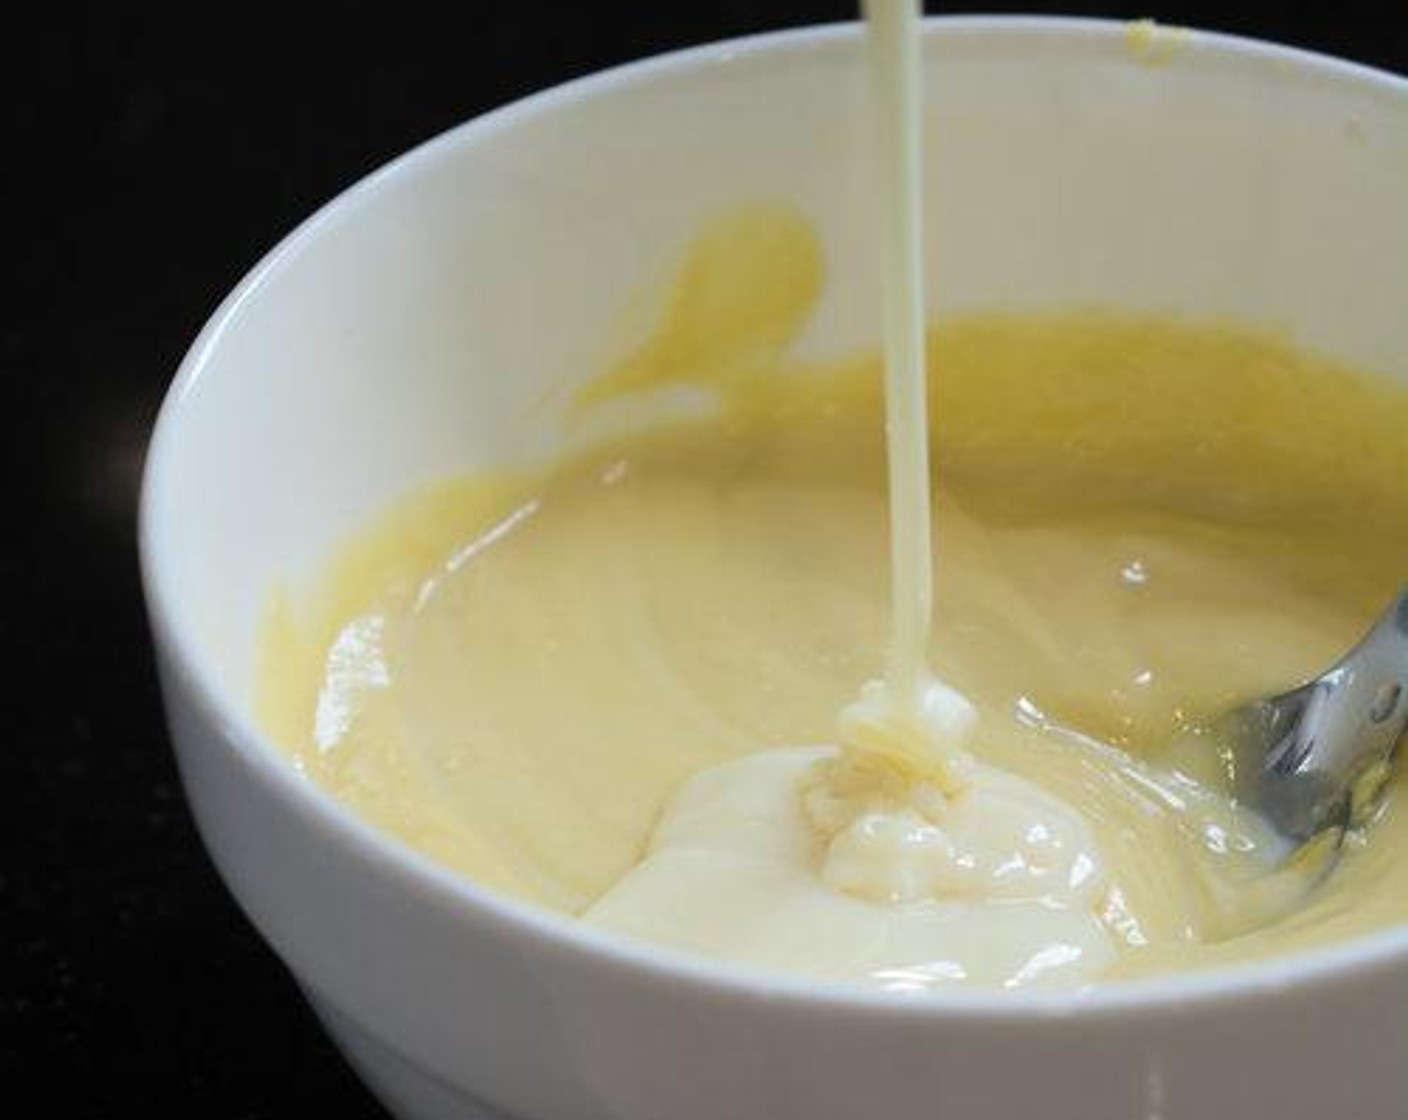 step 2 Stir Sweetened Condensed Milk (3/4 cup) into the strained durian pulp, mix well then set aside.